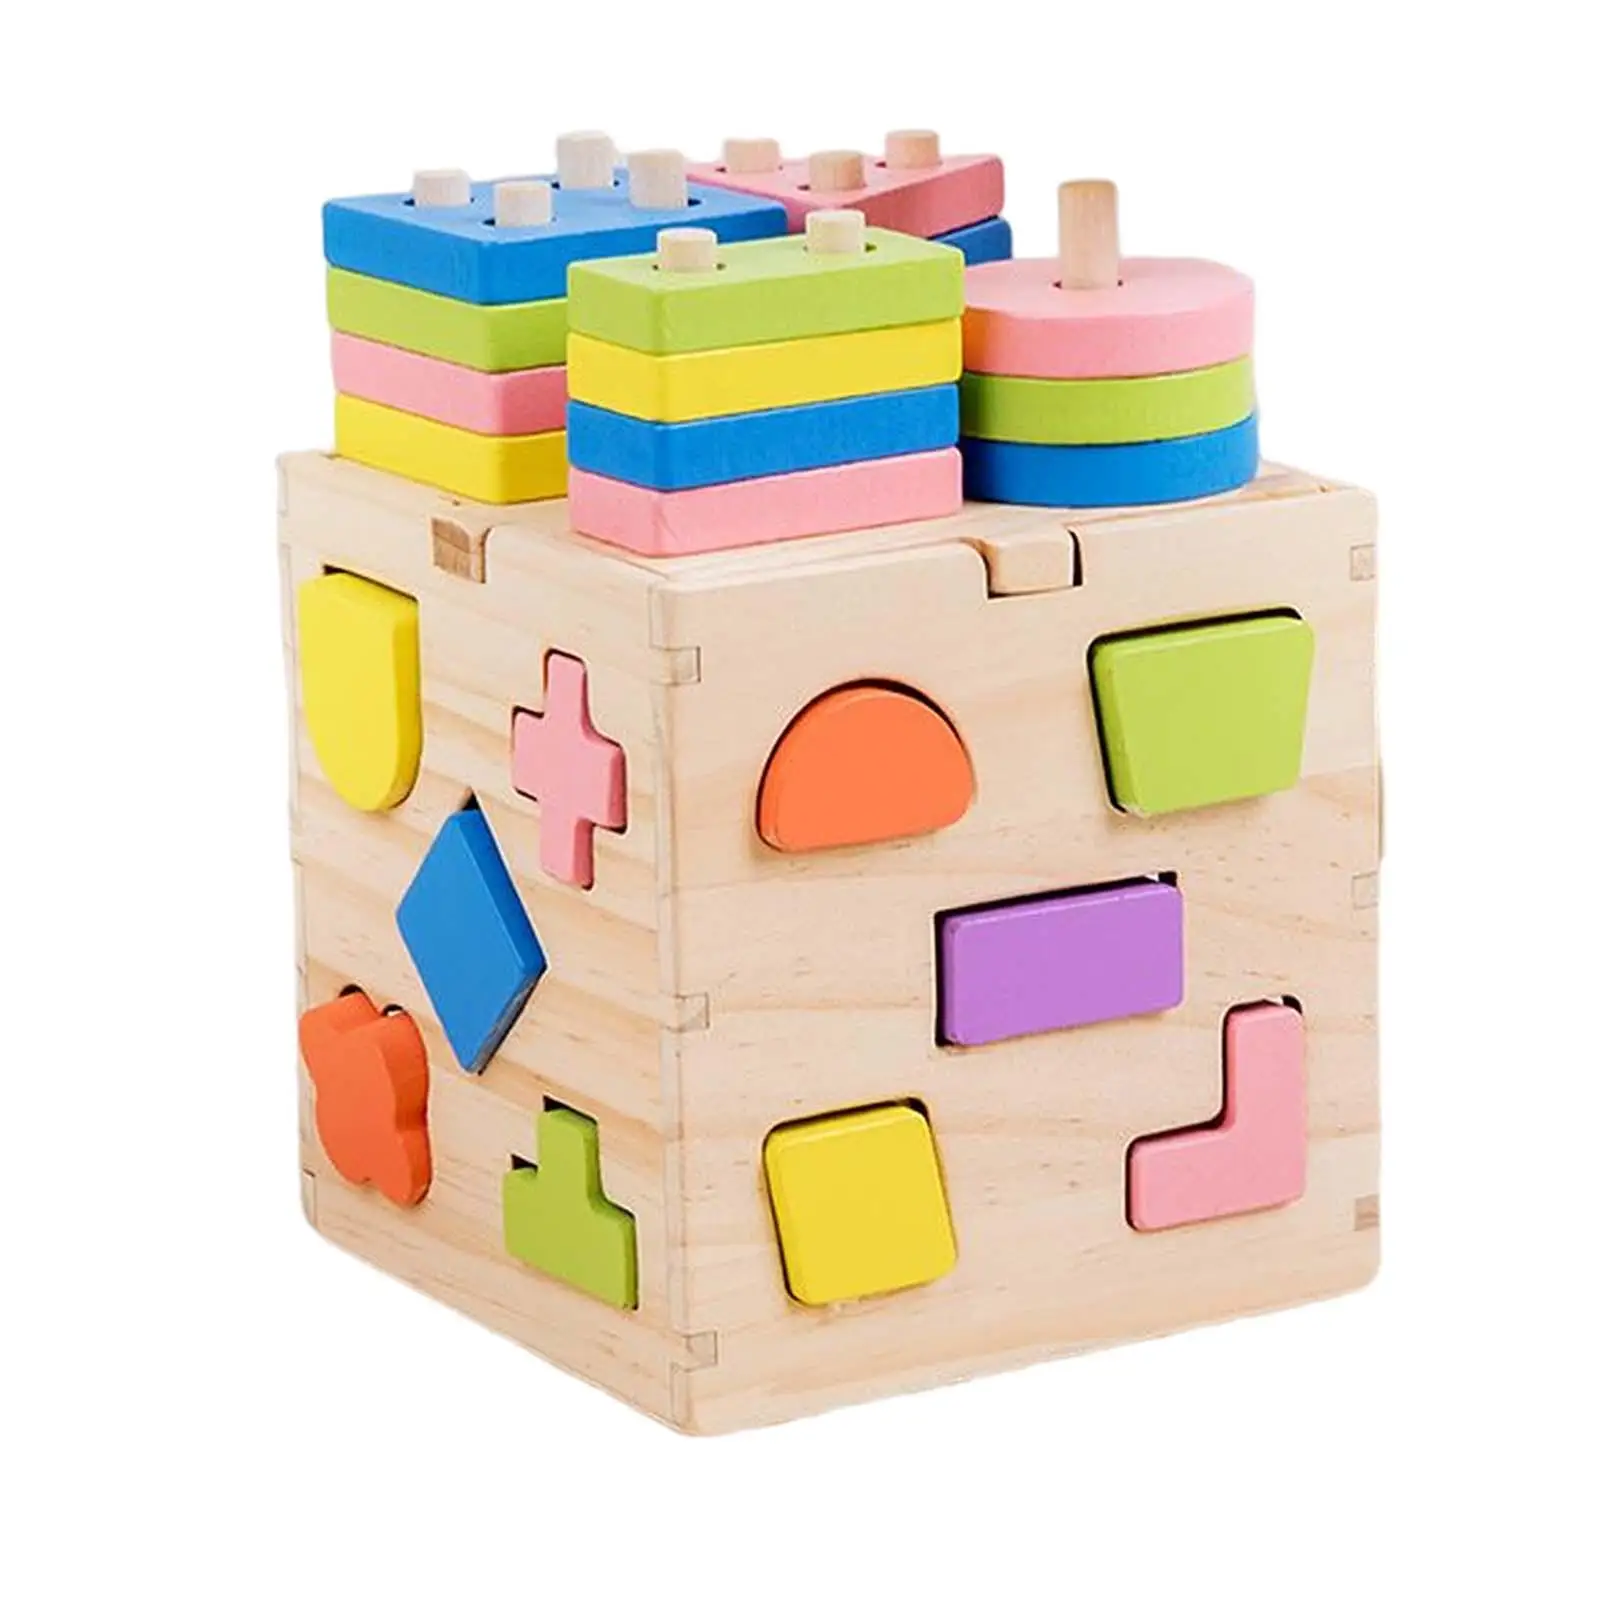 Wooden Geometric Shape Toy Educational Learning Toy Developmental Toy Develop Fine Motor Skill for Girls Children Holiday Gifts